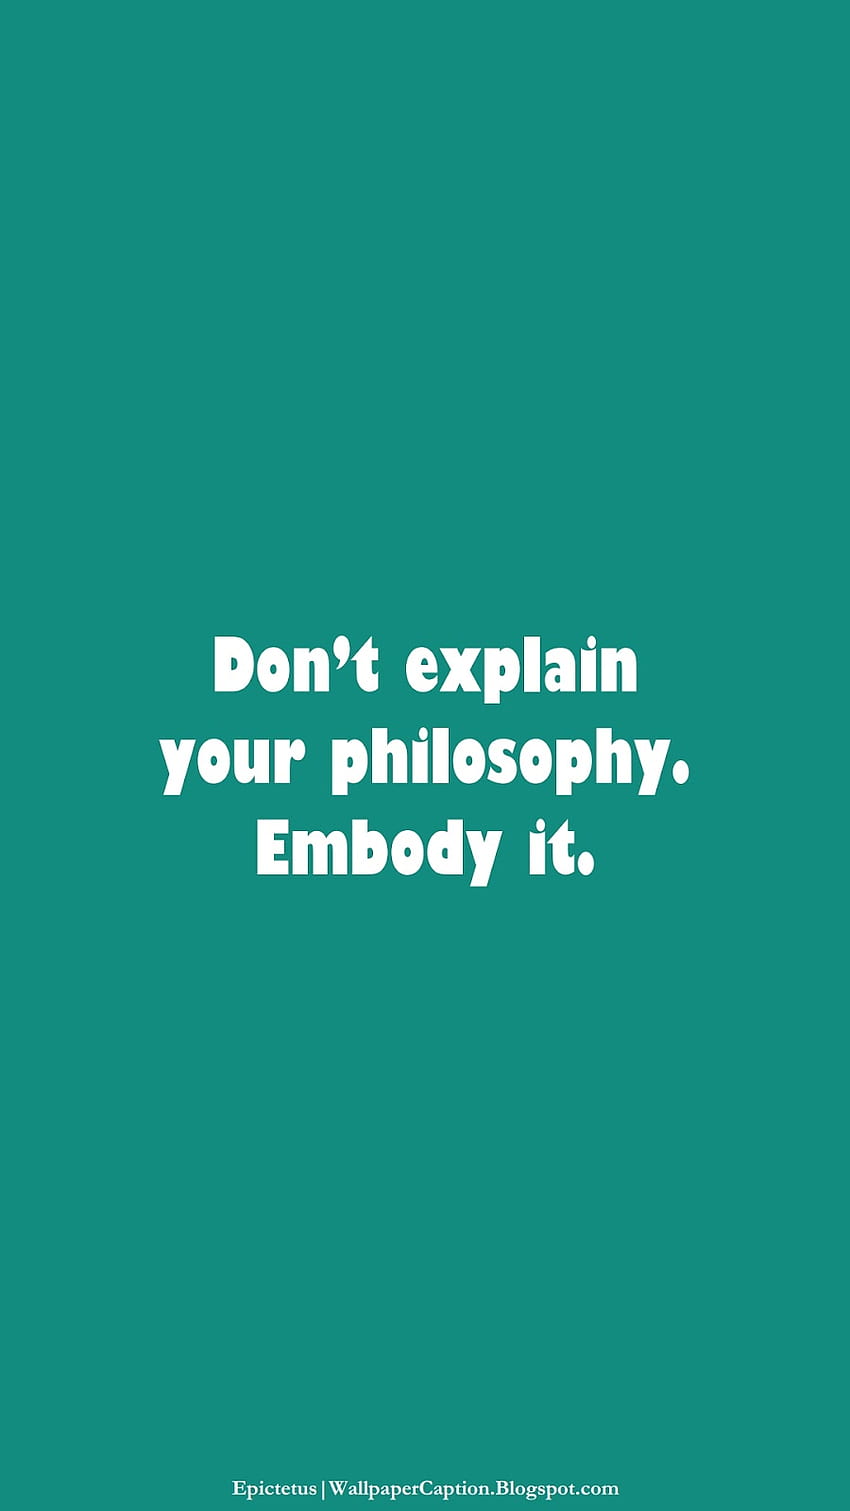 Phone with Short Quotes (Part 13.7 Teal Green WhatsApp) - Caption, Philosophy Phone HD phone wallpaper